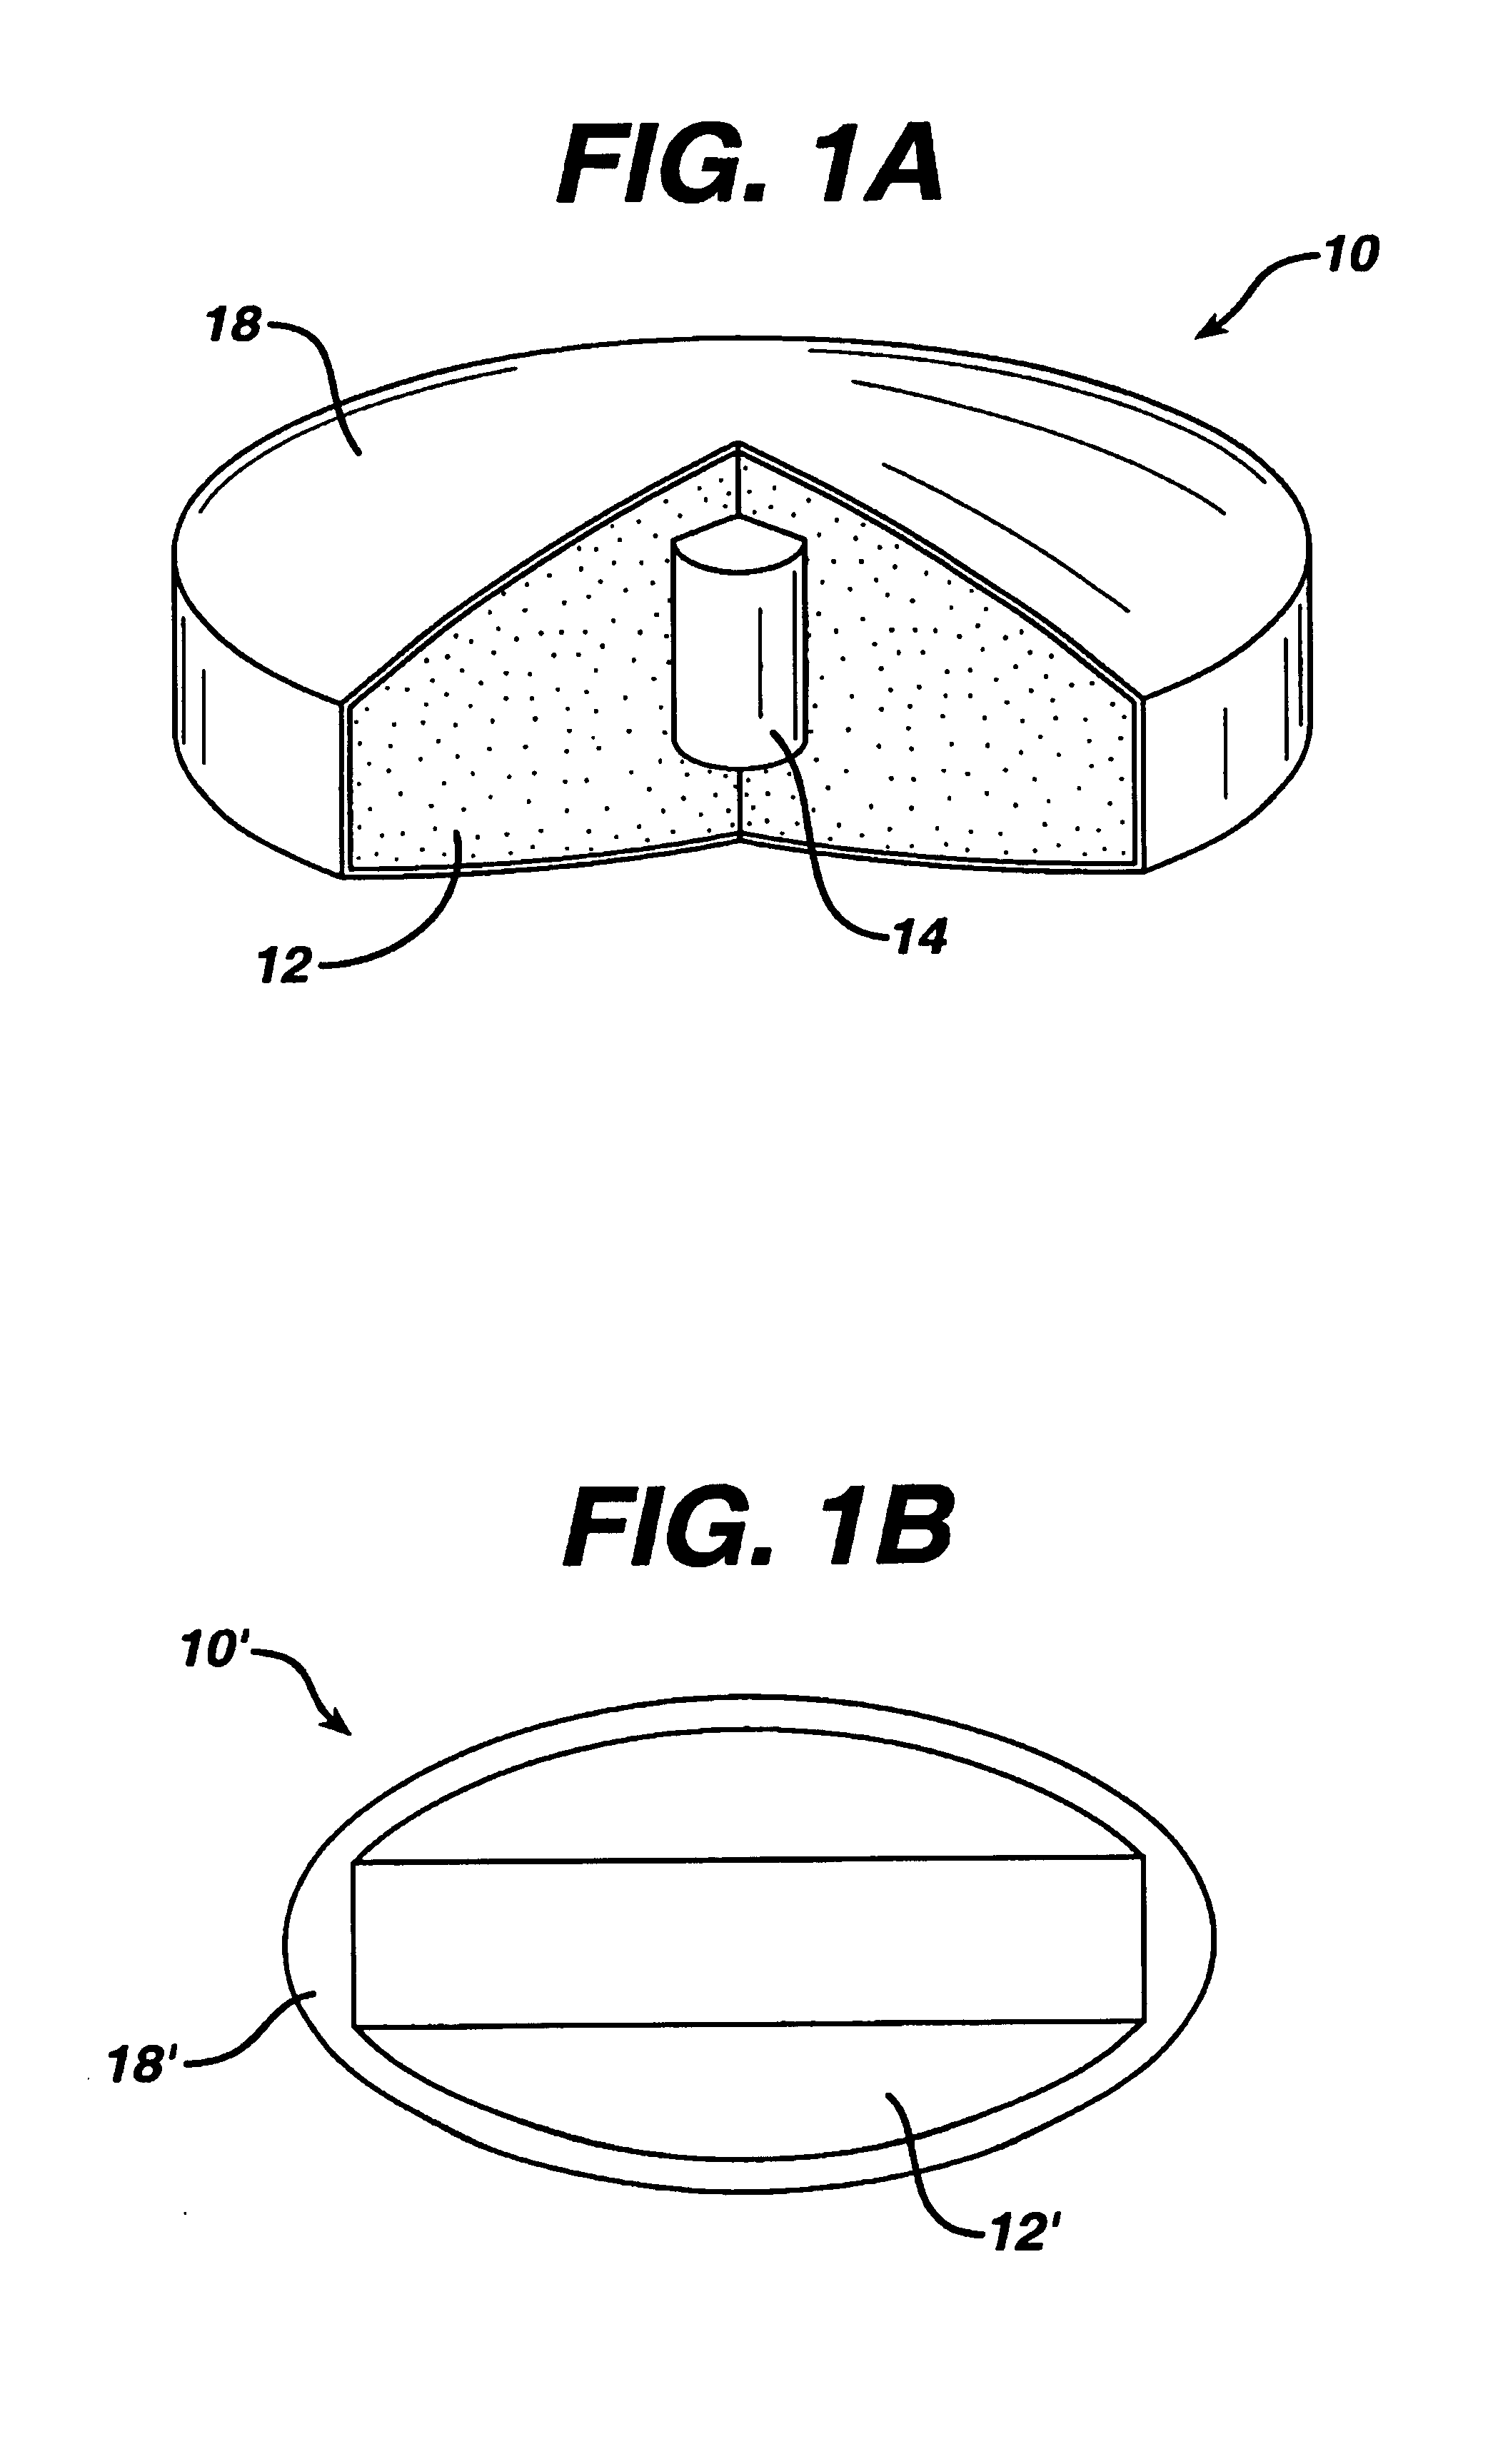 Systems, methods and apparatuses for manufacturing dosage forms